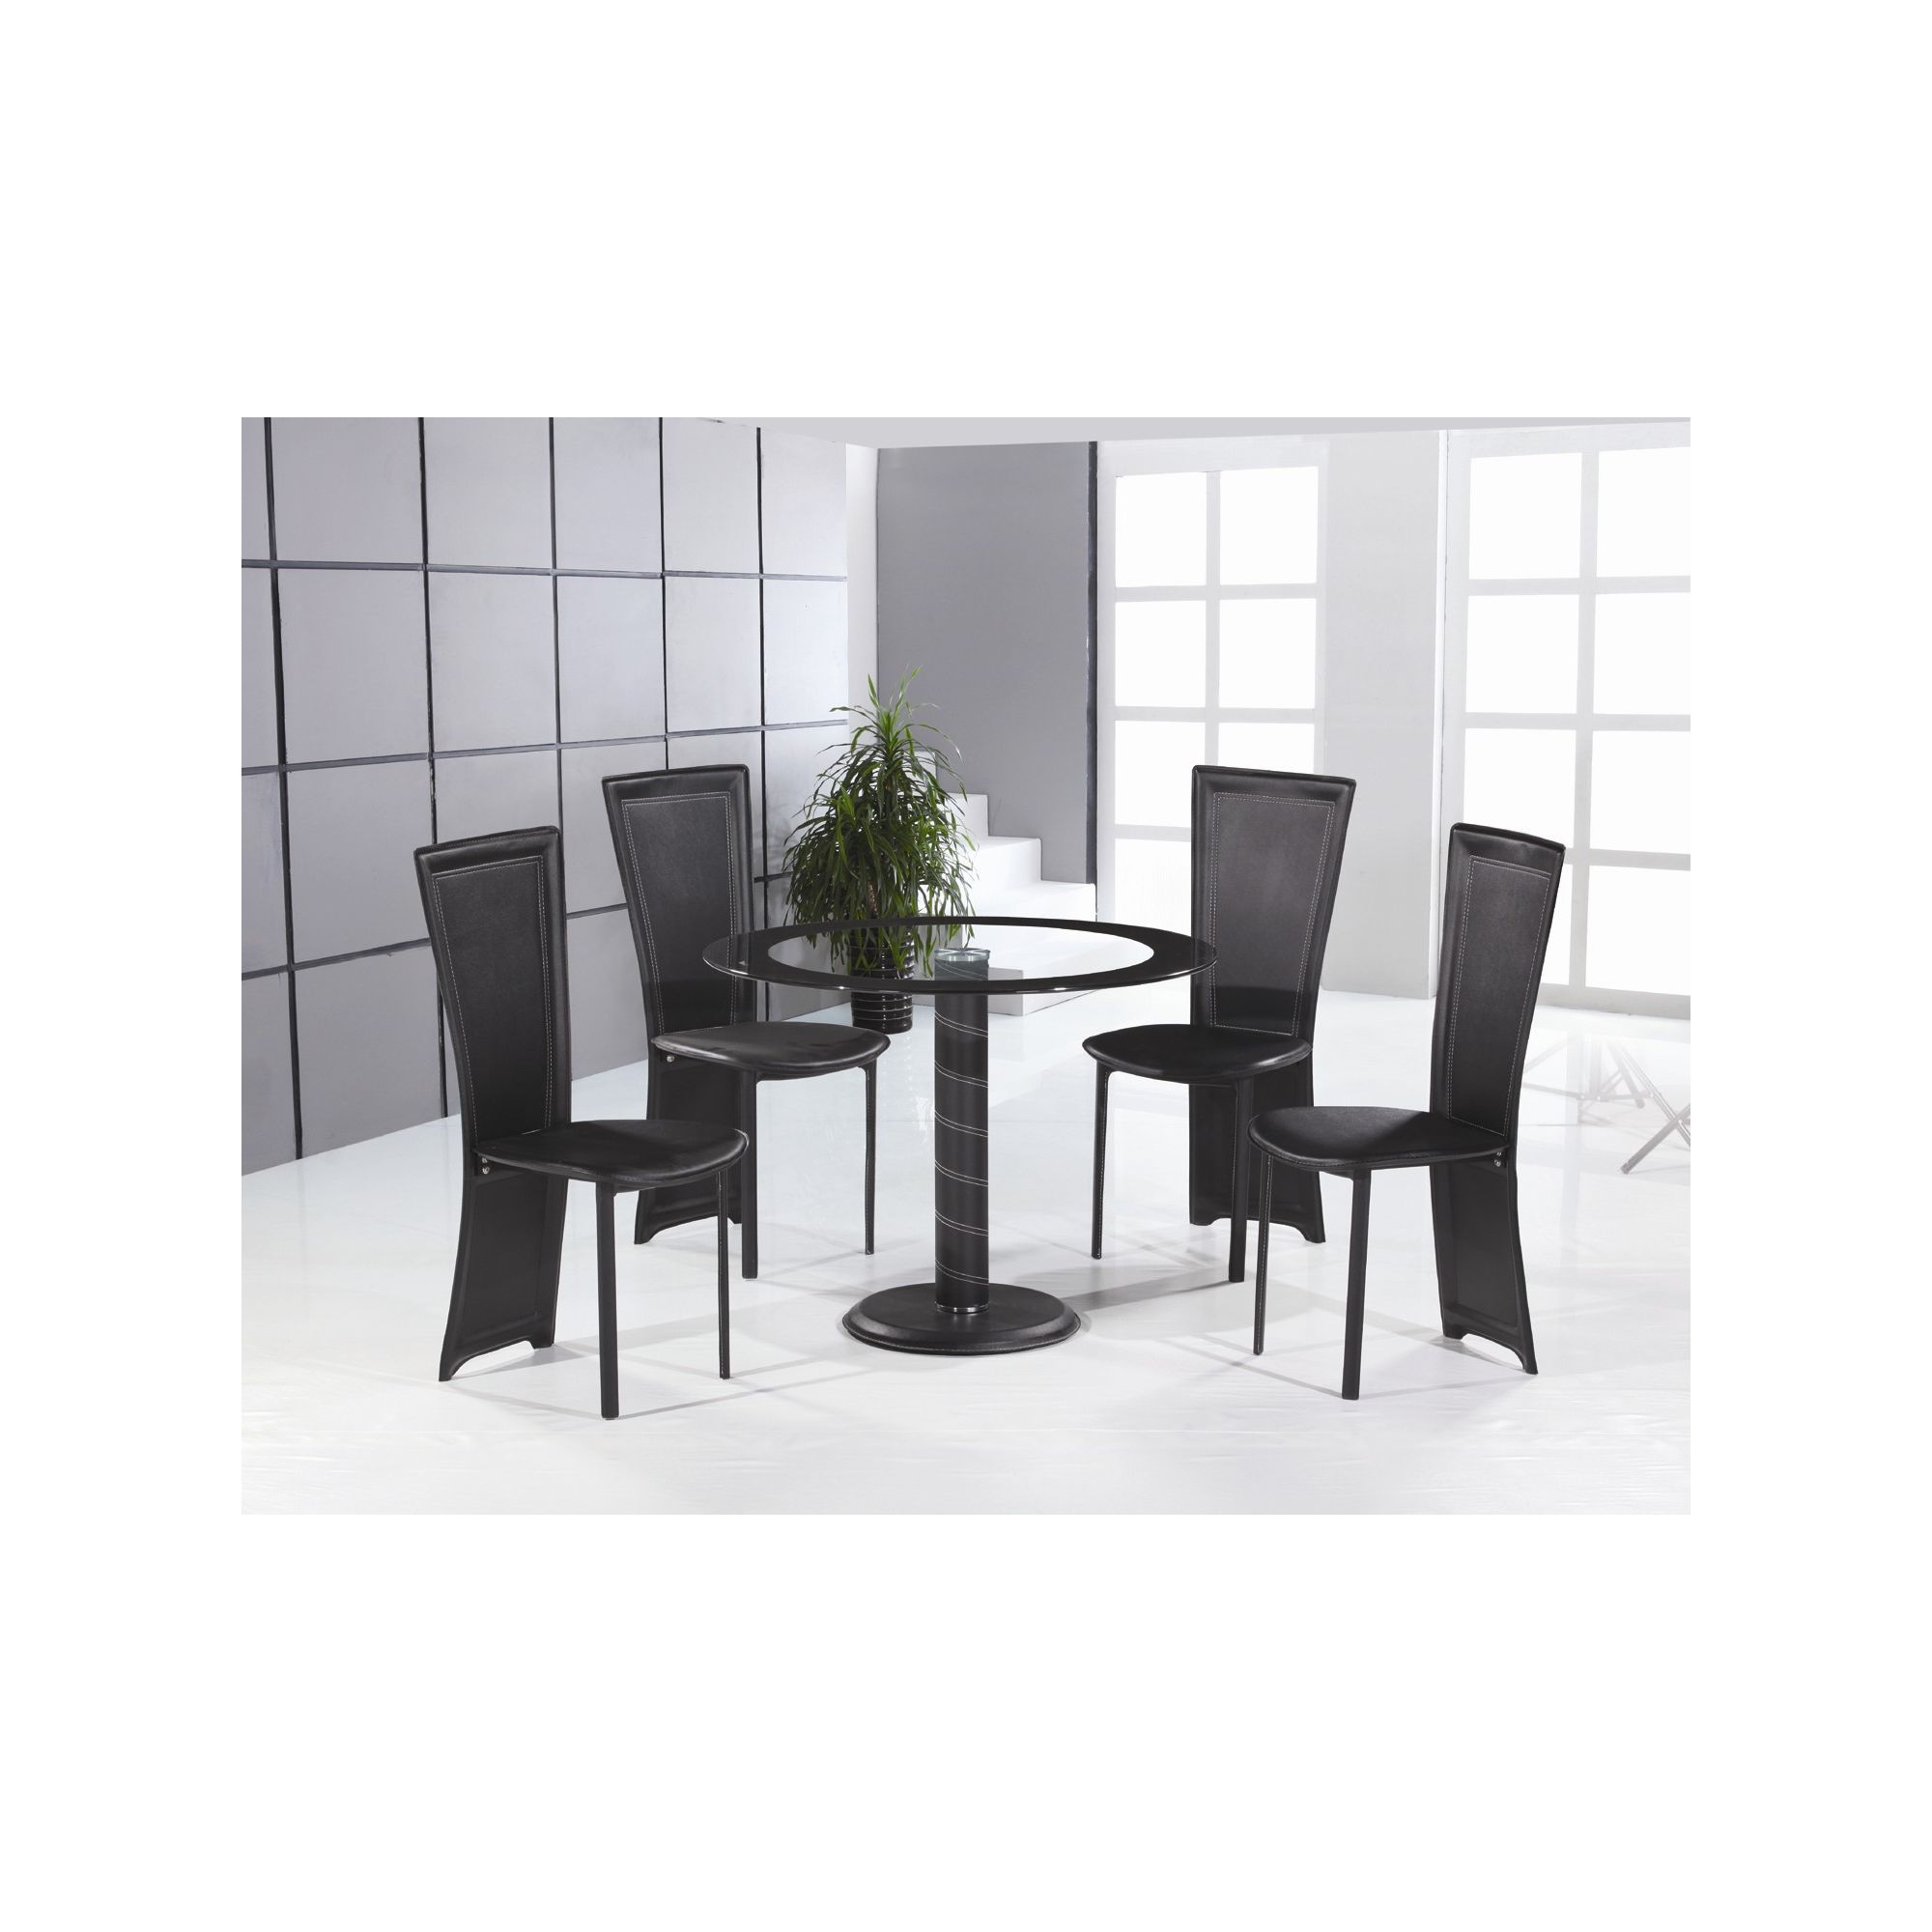 Home Zone Lenora 5 Piece Dining Set at Tesco Direct